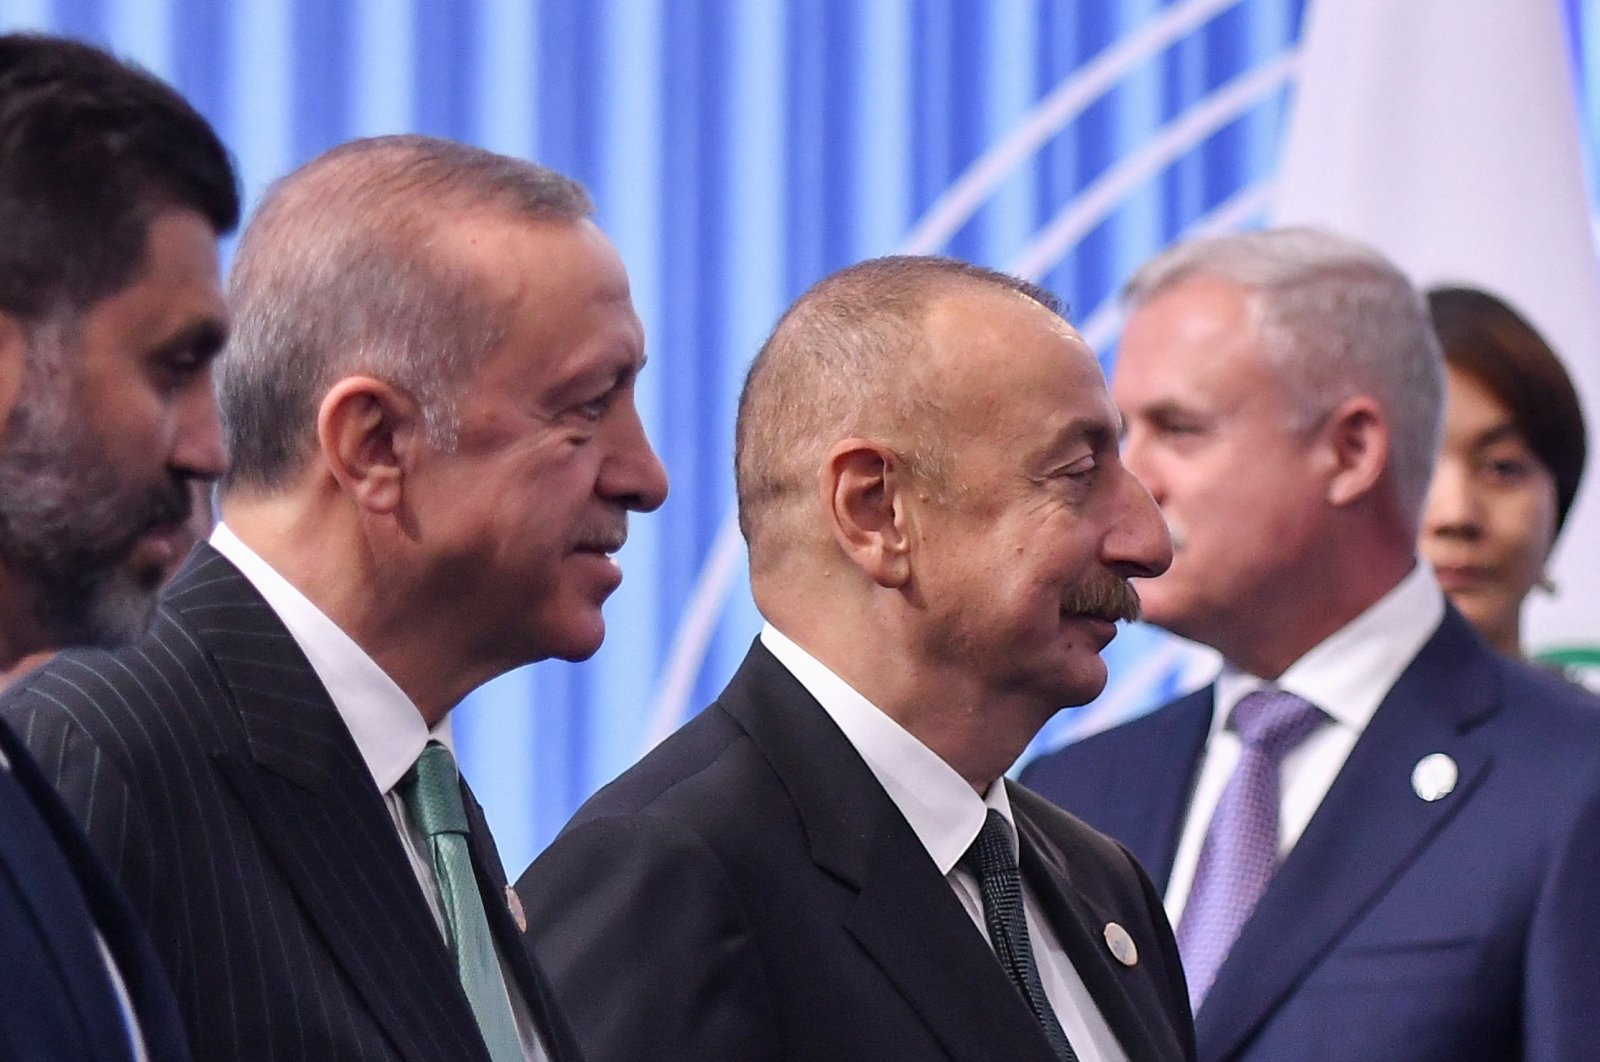 President Tayyip Erdoğan and Azerbaijan&#039;s President Ilham Aliyev take part in the 6th summit of the Conference on Interaction and Confidence-building Measures in Asia (CICA), in Astana, Kazakhstan Oct. 13, 2022.  REUTERS/Turar Kazangapov